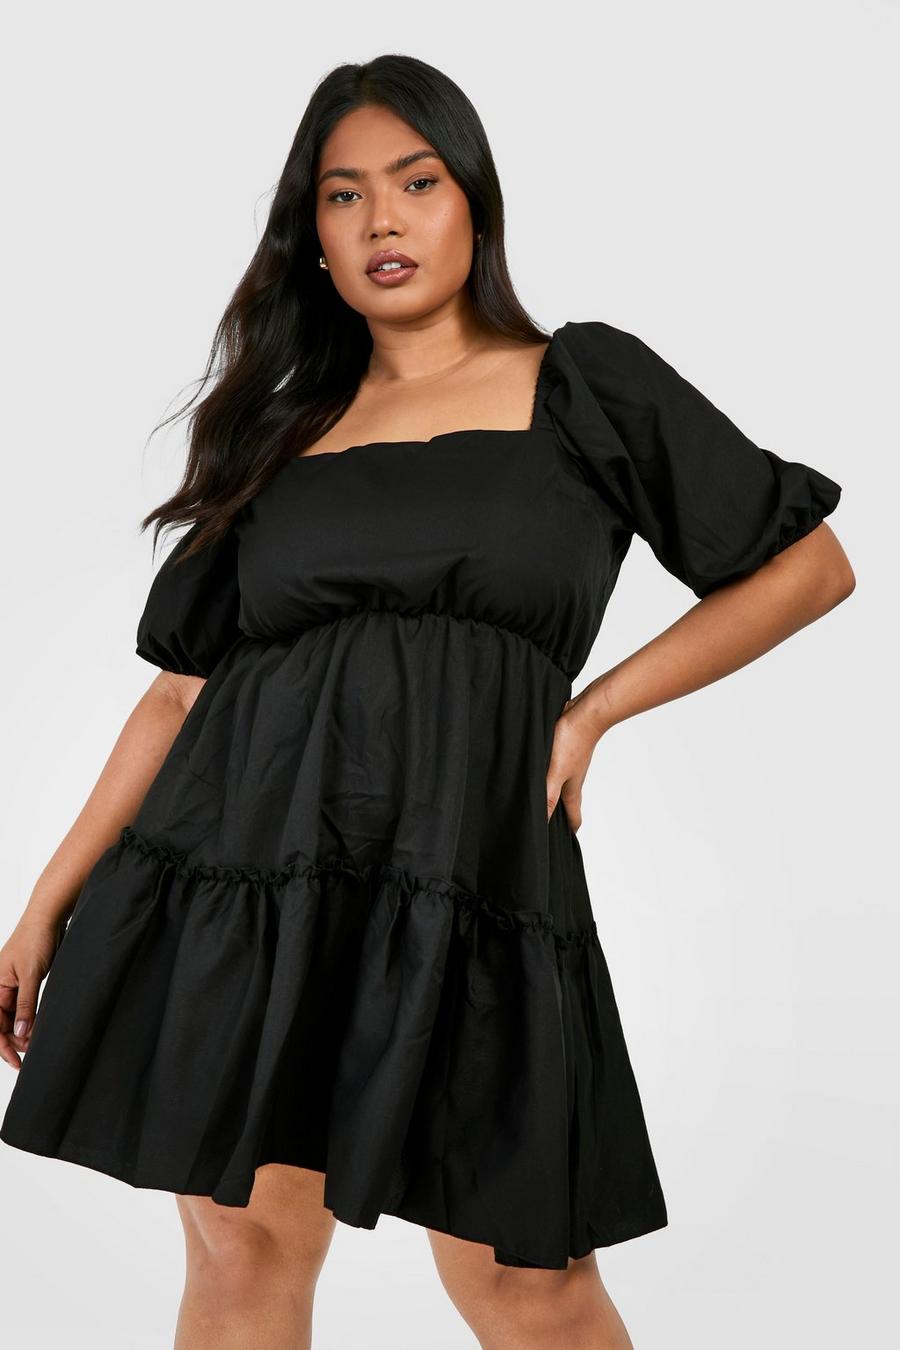  Women's Dress Dresses for Women Square Neck Puff Sleeve Dress  (Color : Black, Size : Medium) : Clothing, Shoes & Jewelry